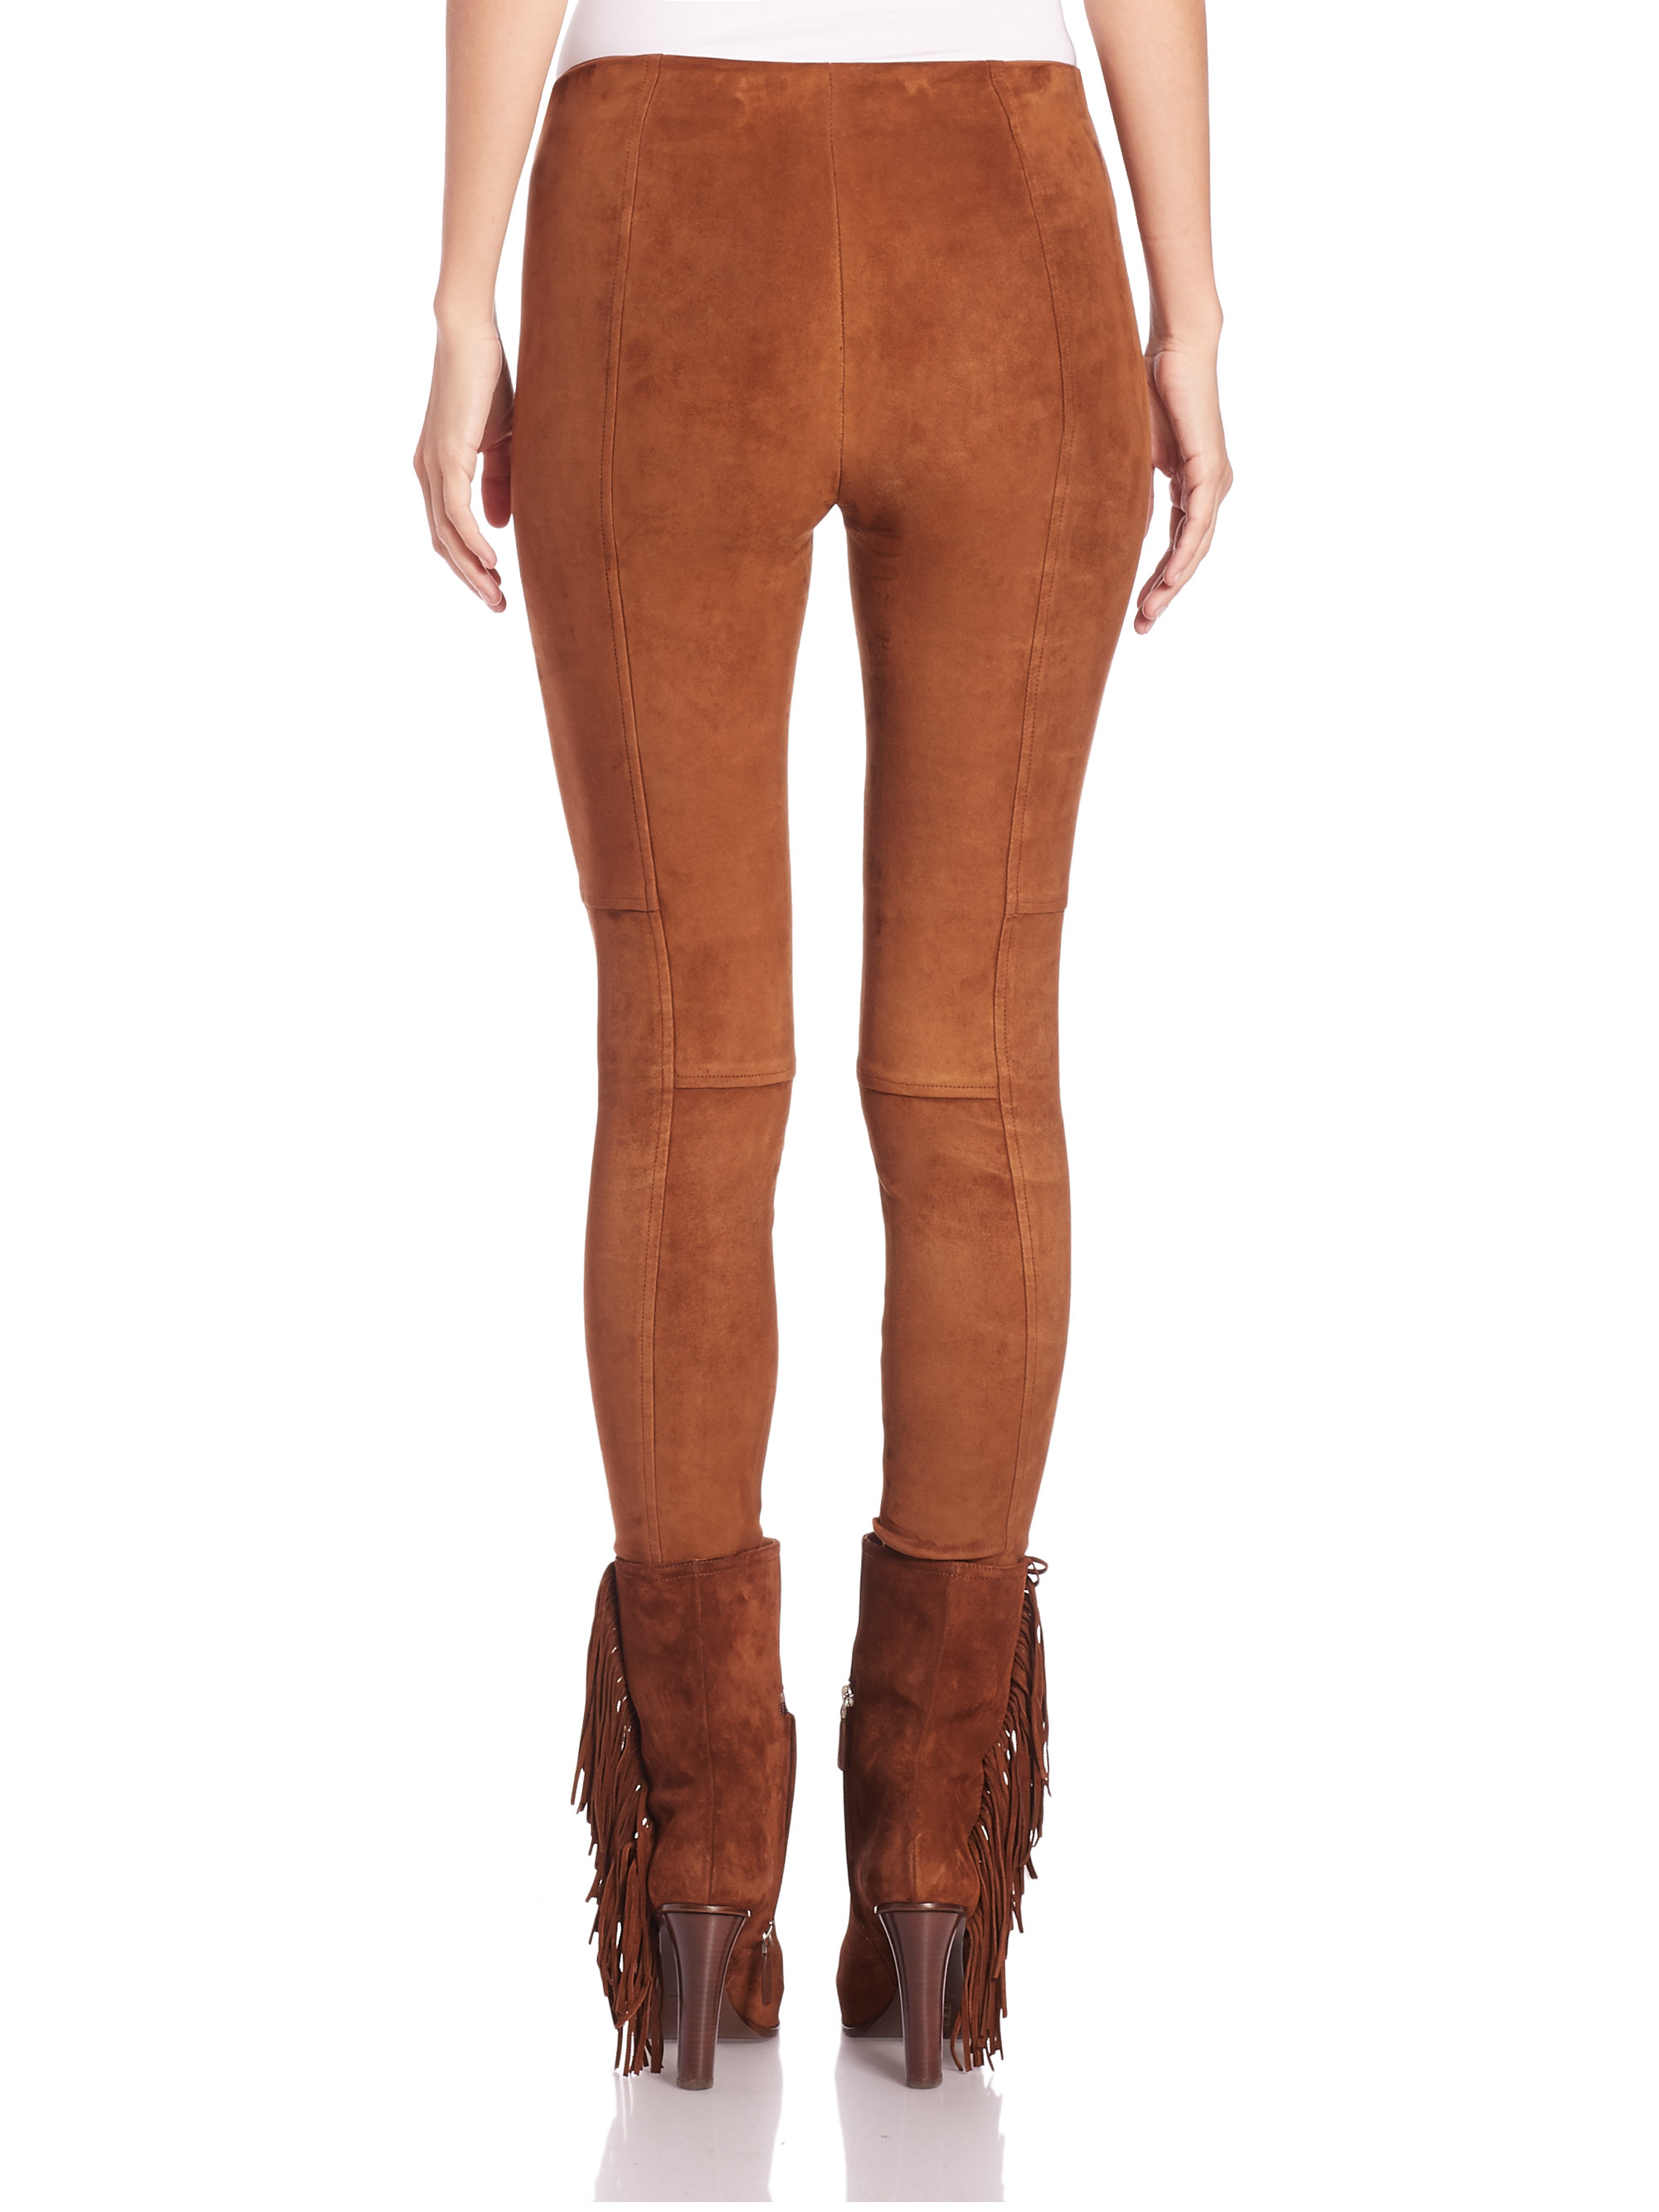 Lyst - Polo Ralph Lauren Stretch Suede Skinny Pants in Brown